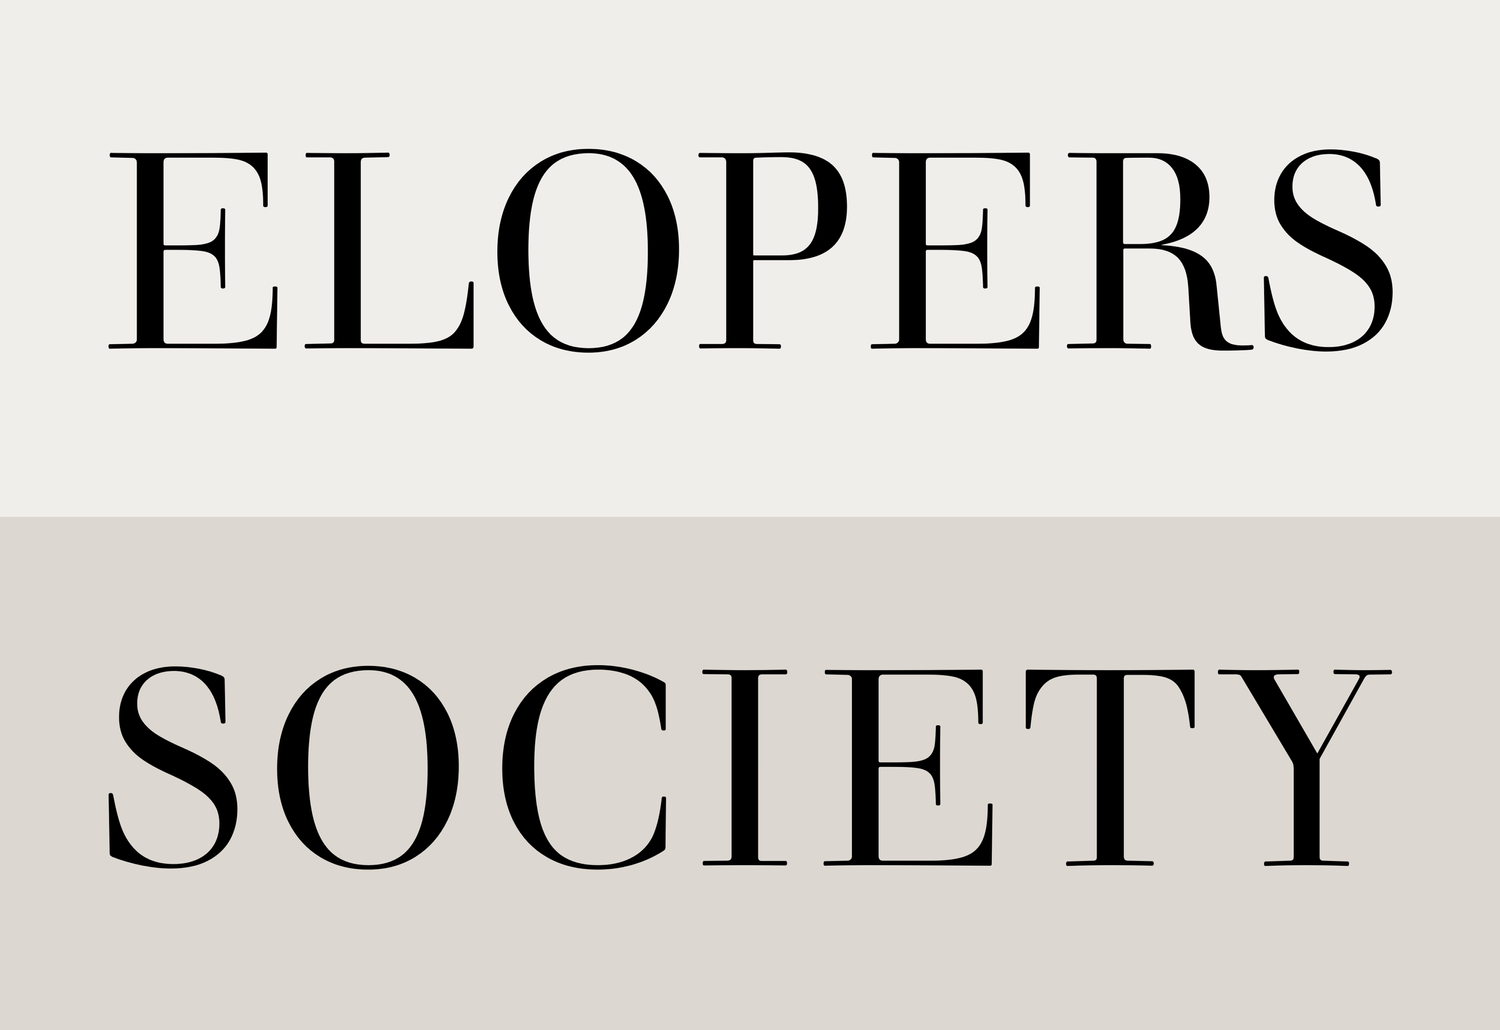 Elopers Society | Elope in Invercargill, Southland | Elopements | Small Weddings